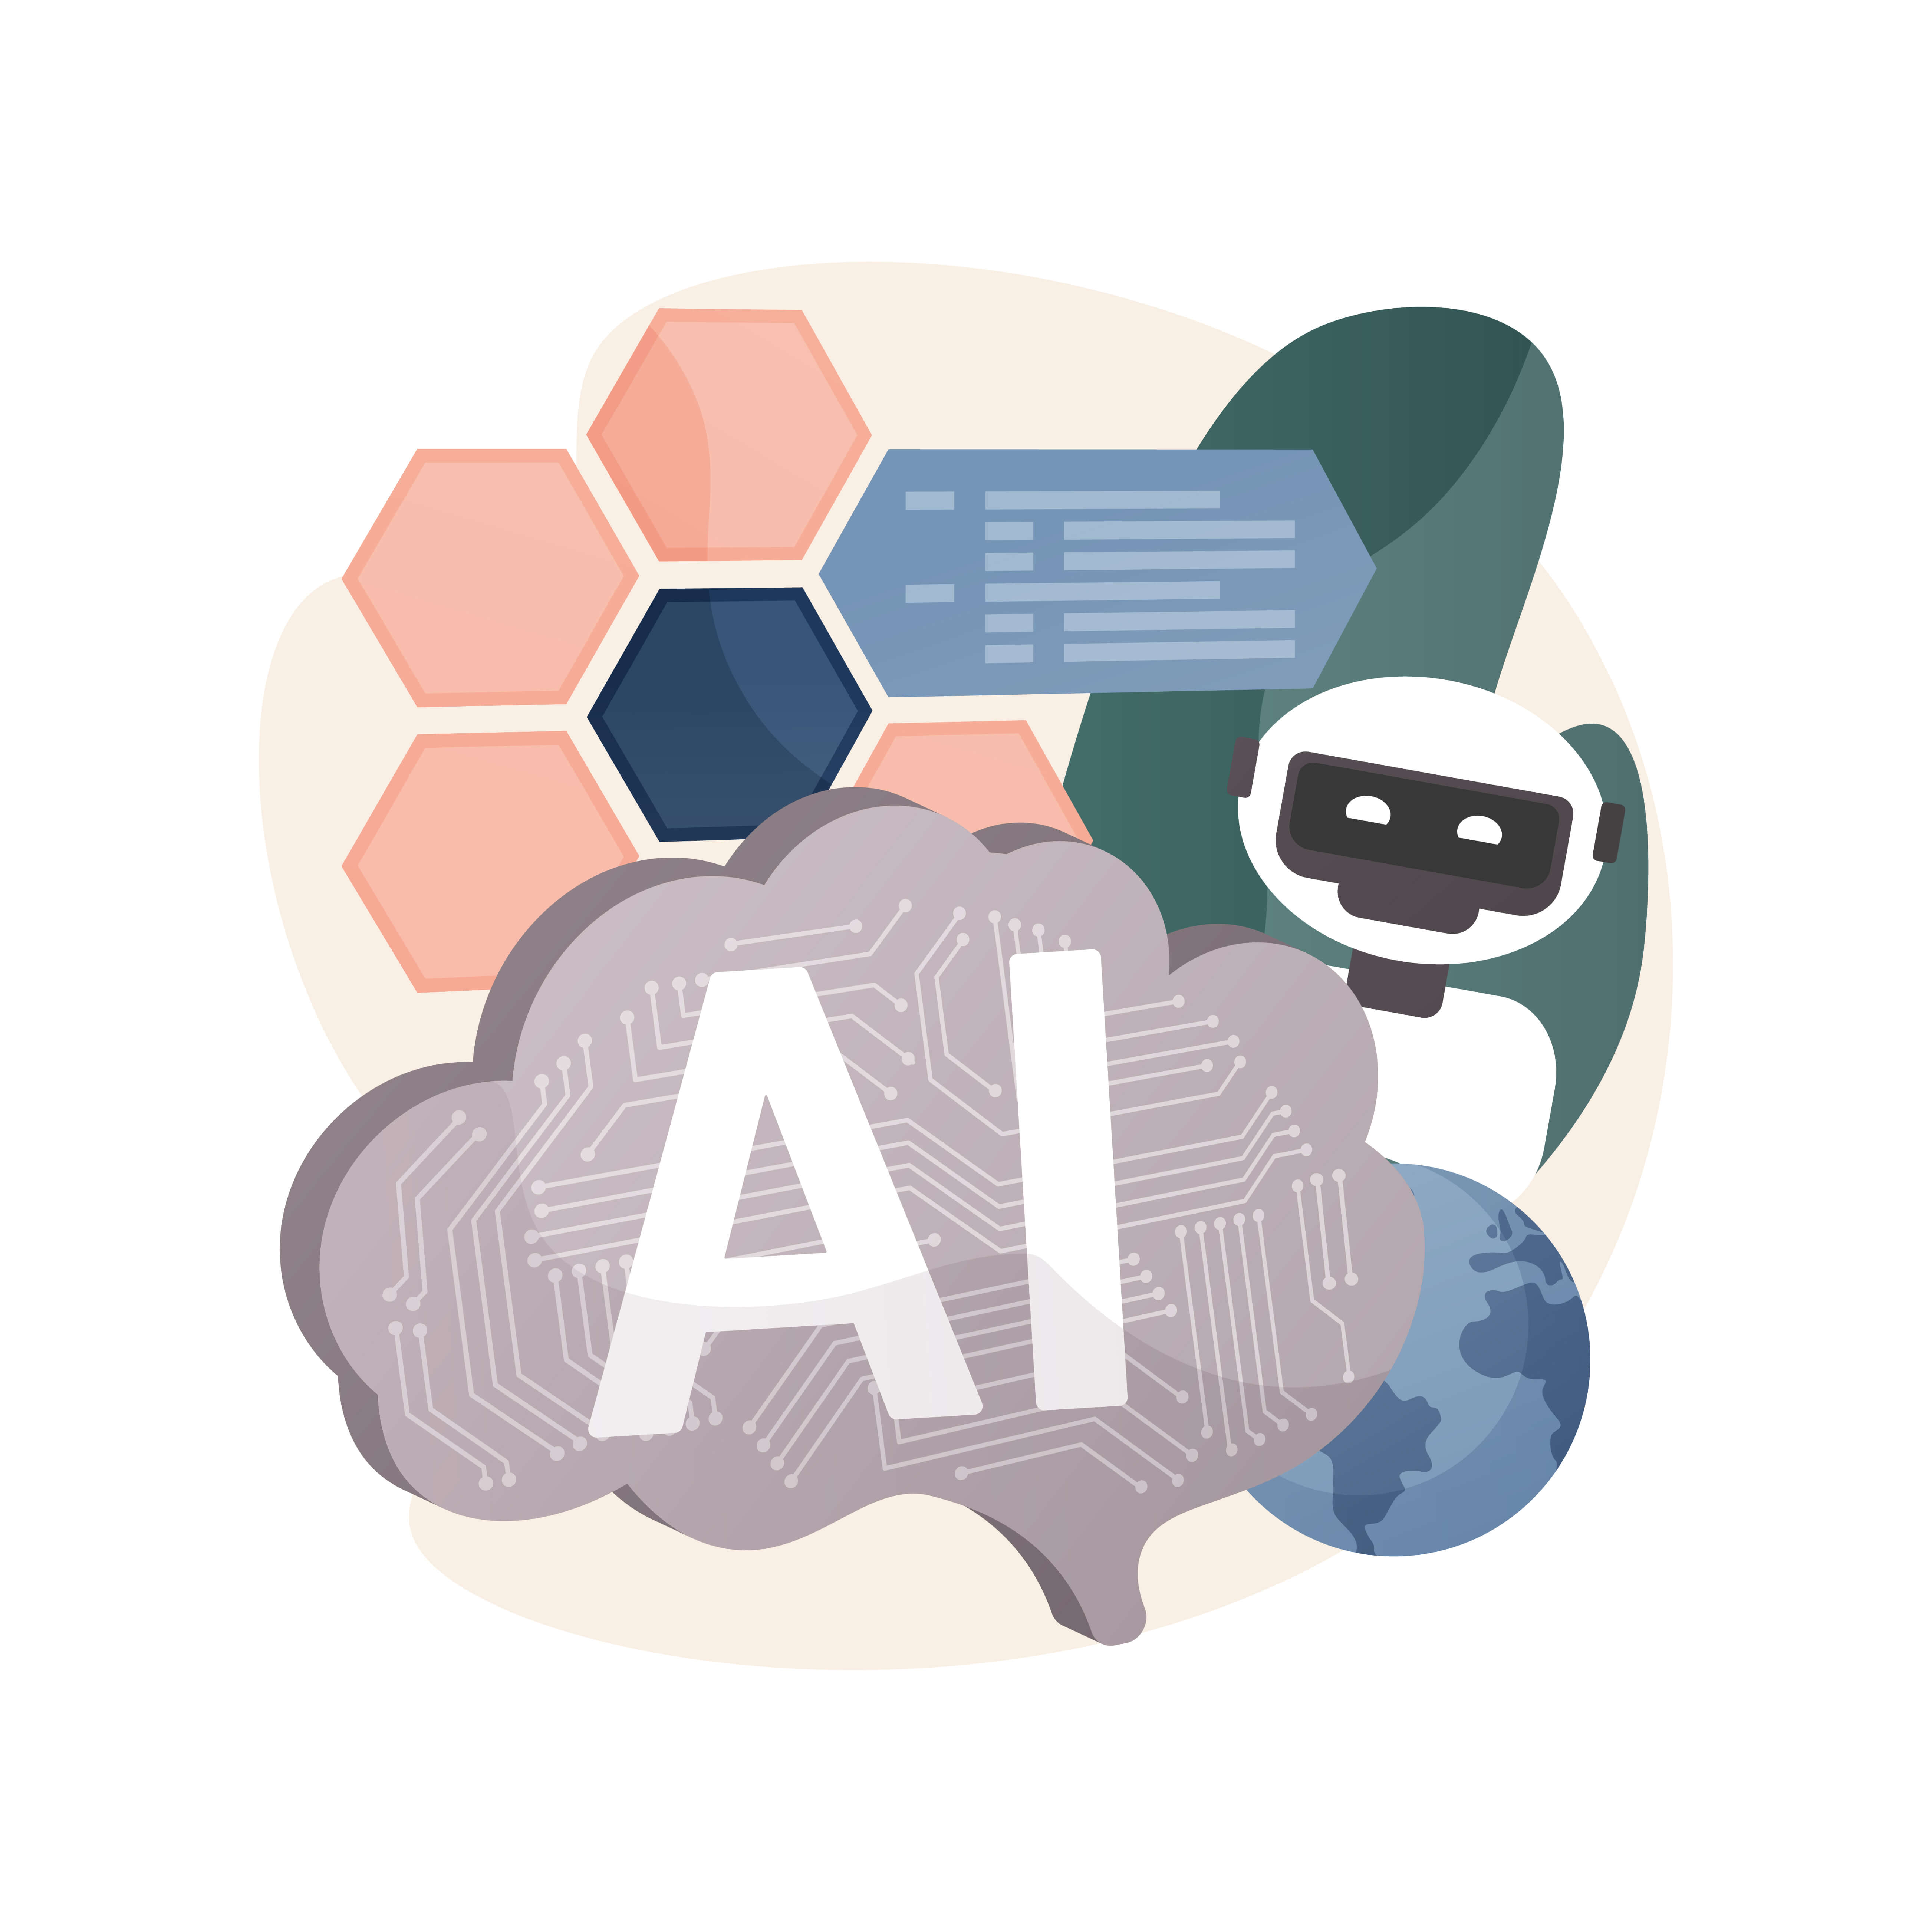 Introduction to AI tools that enrich learning